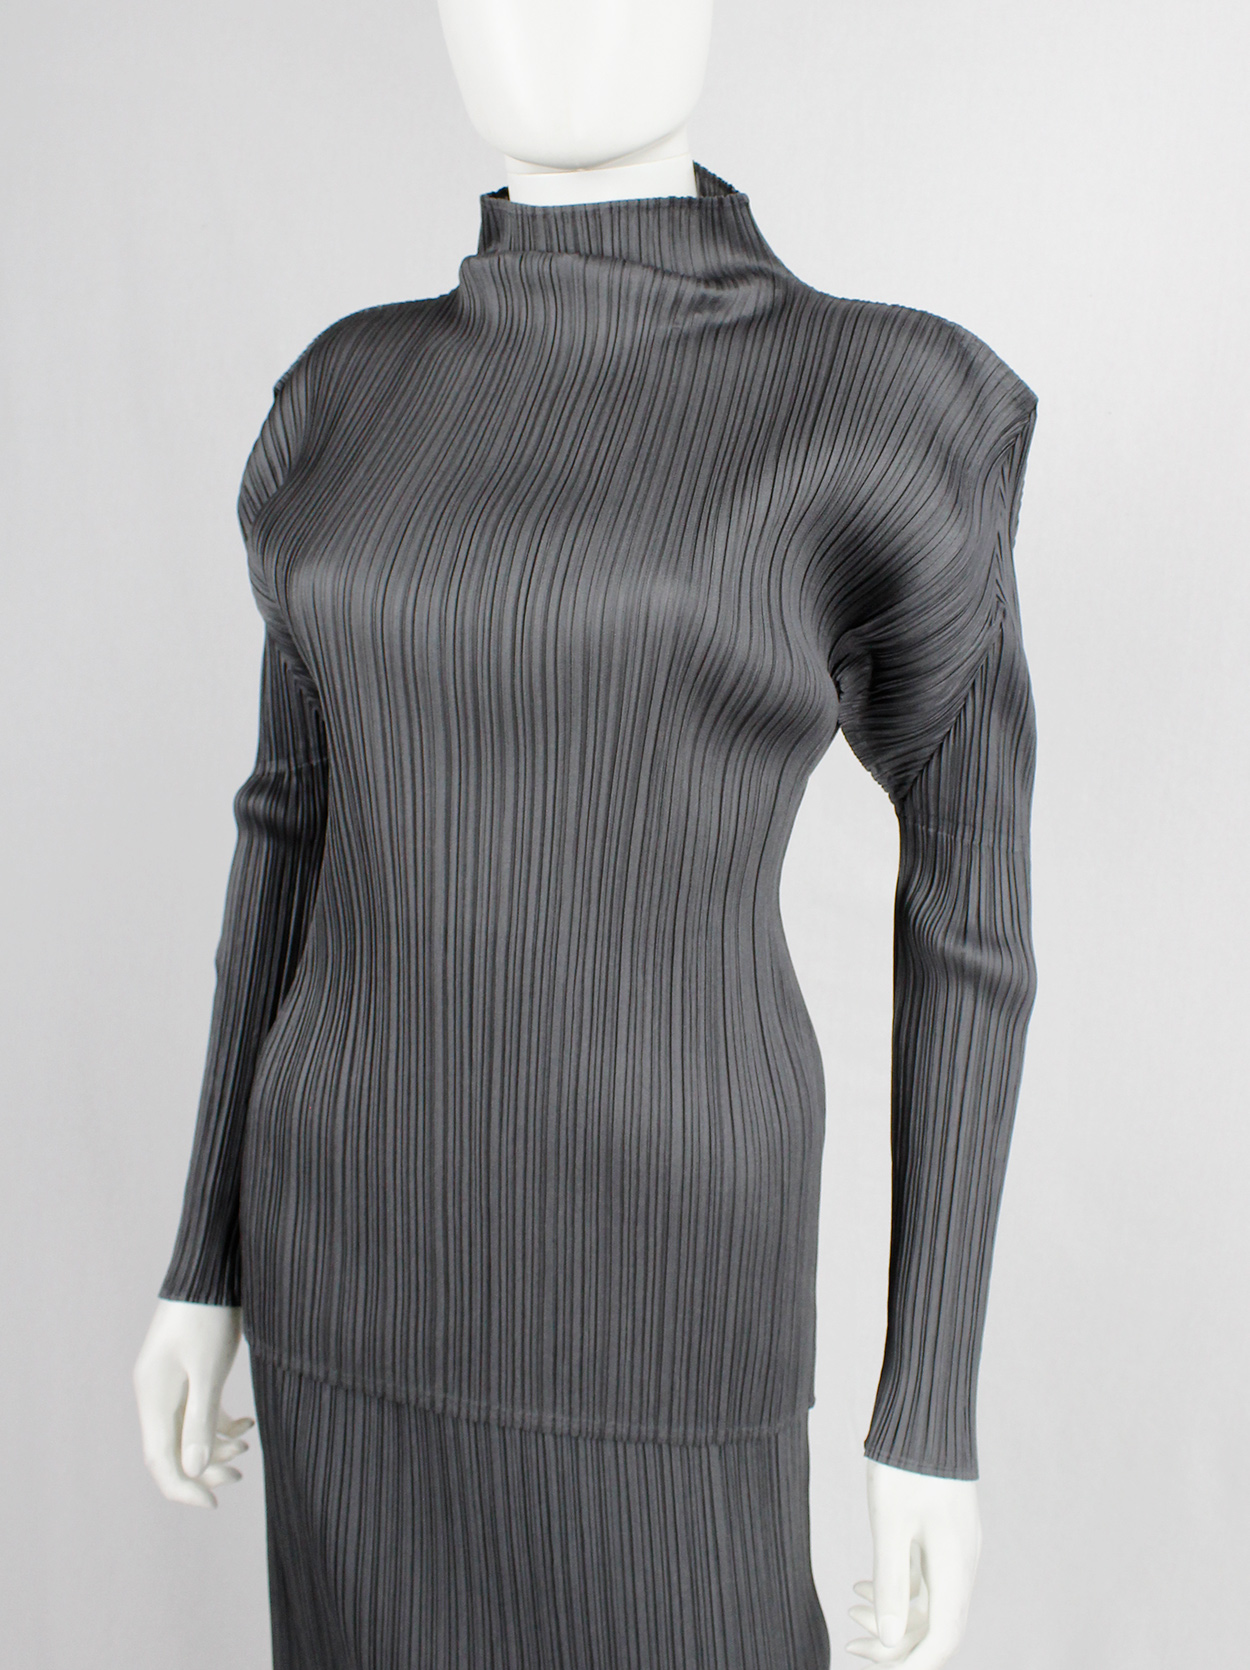 Issey Miyake Pleats Please grey pleated turtleneck jumper with square ...